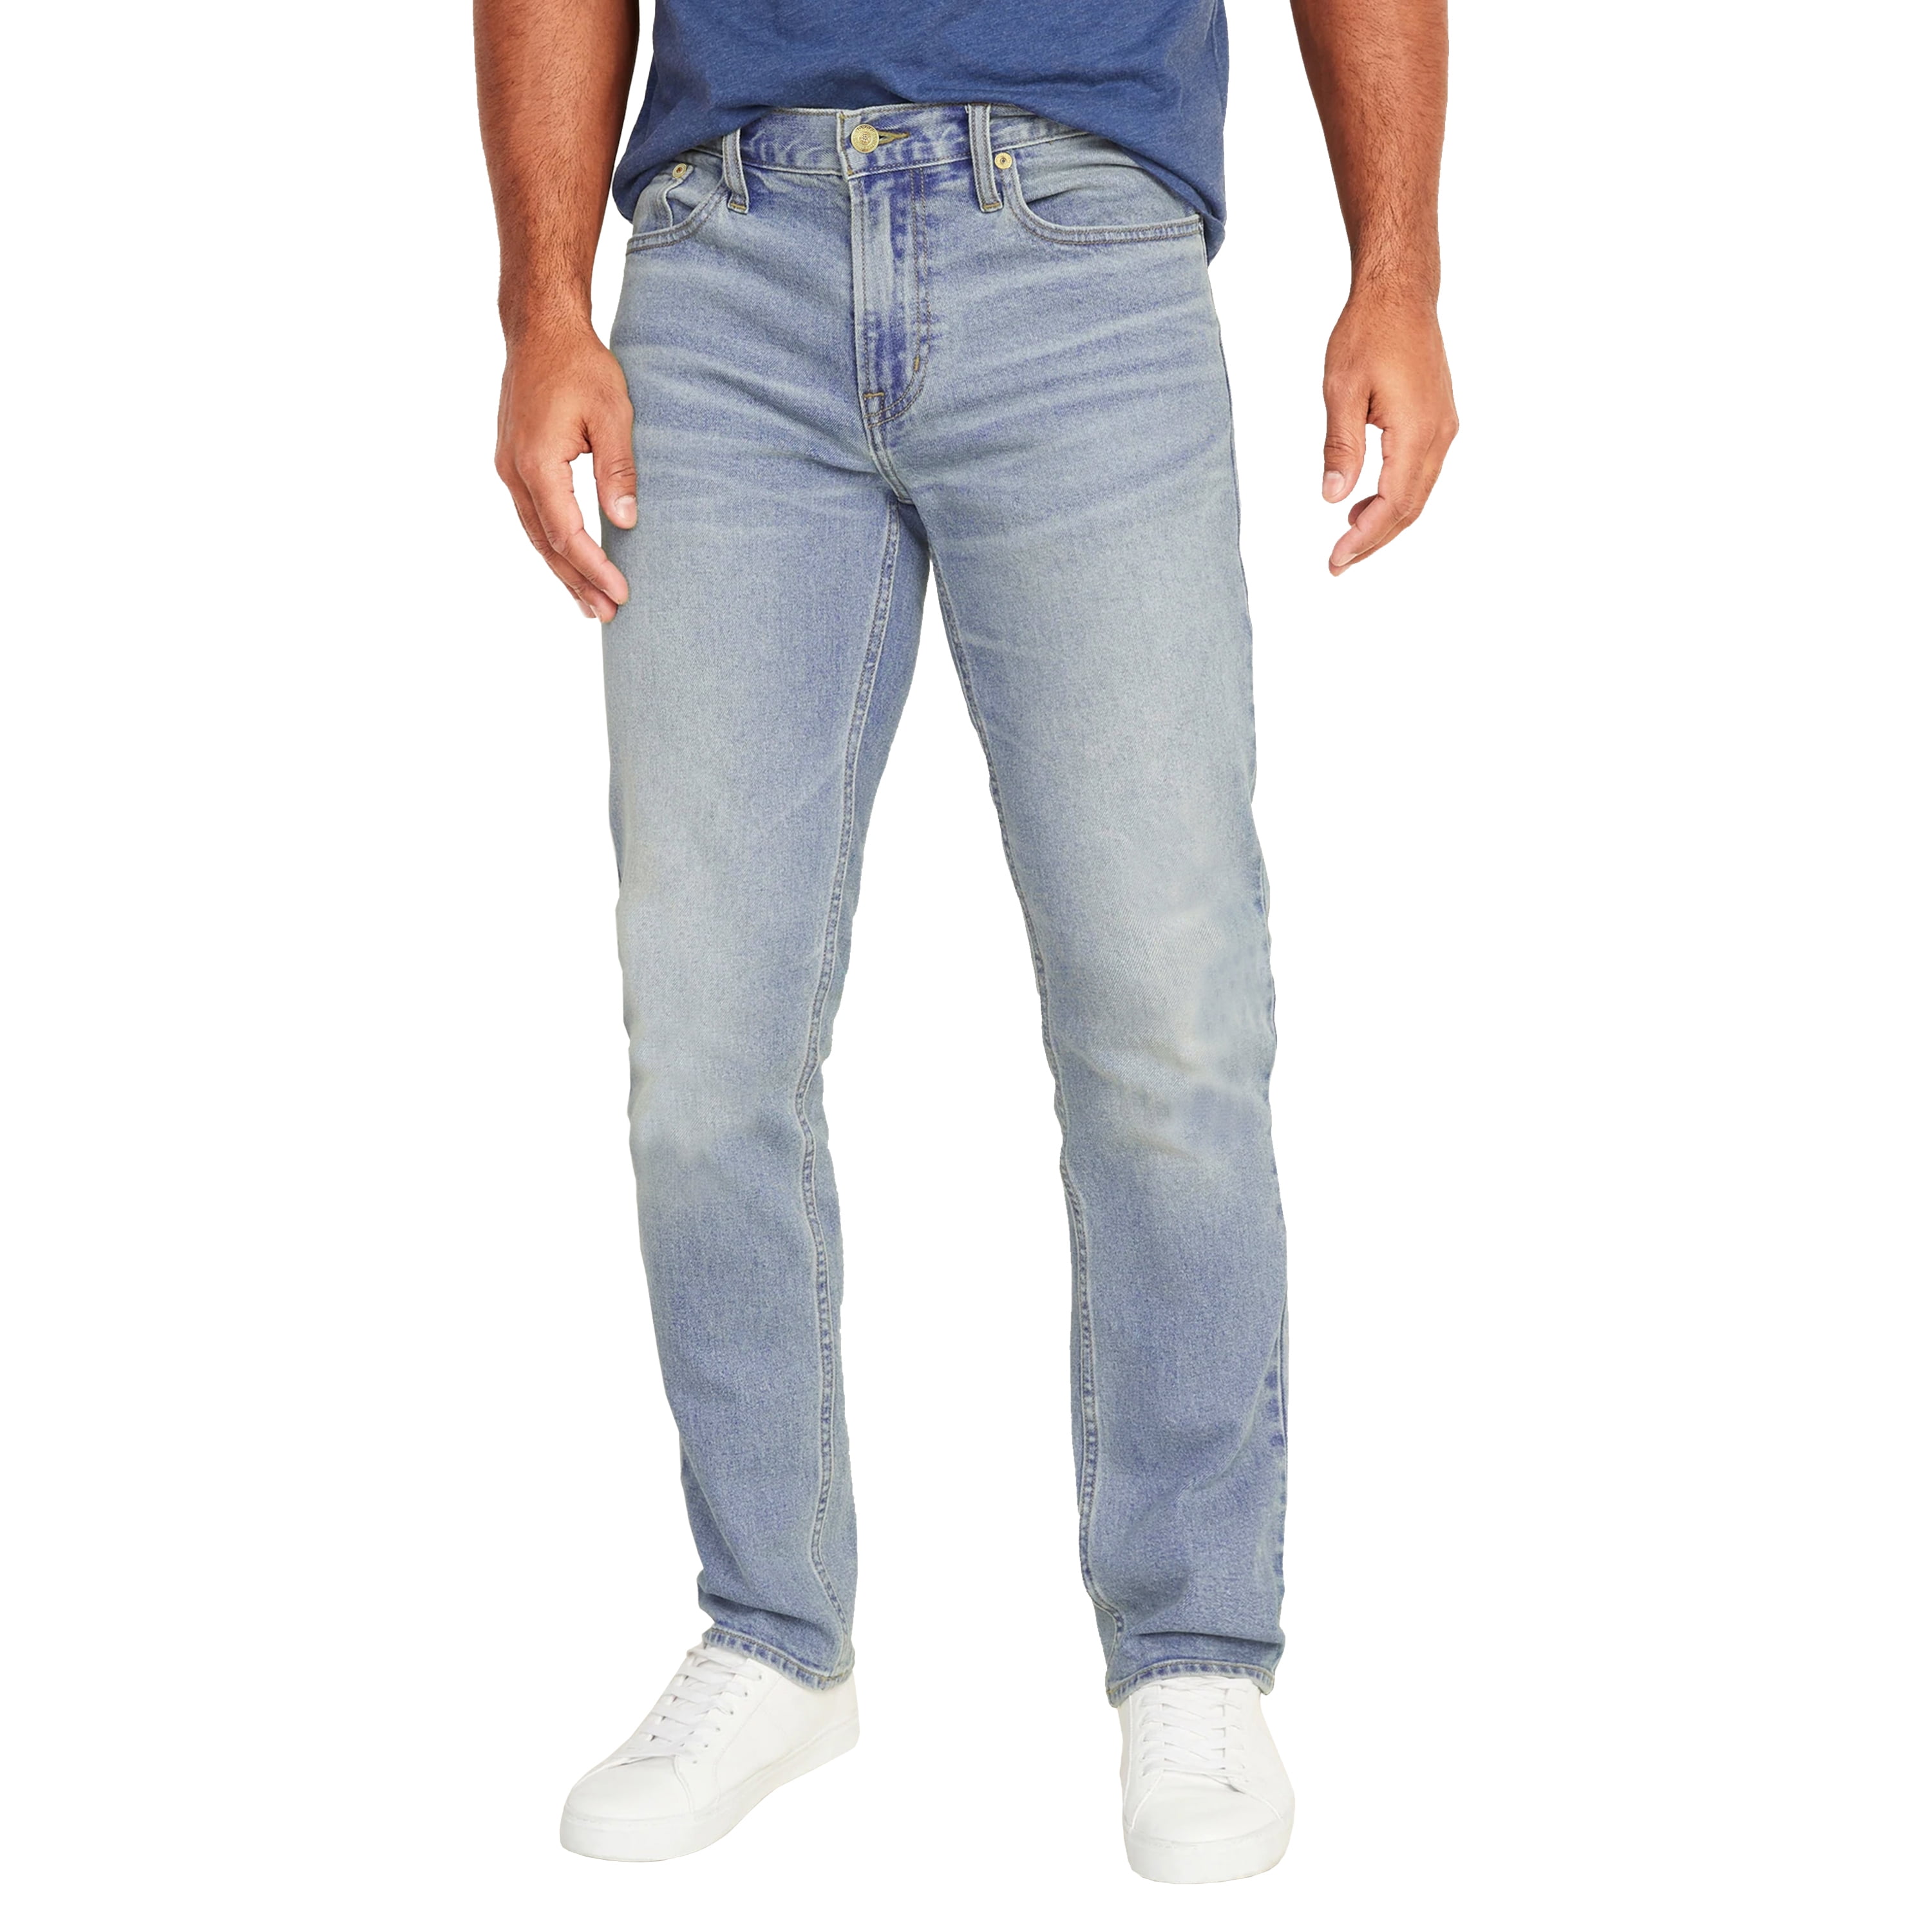 Cinch Men's Dark Stone Wash White Label Relaxed Fit Jeans